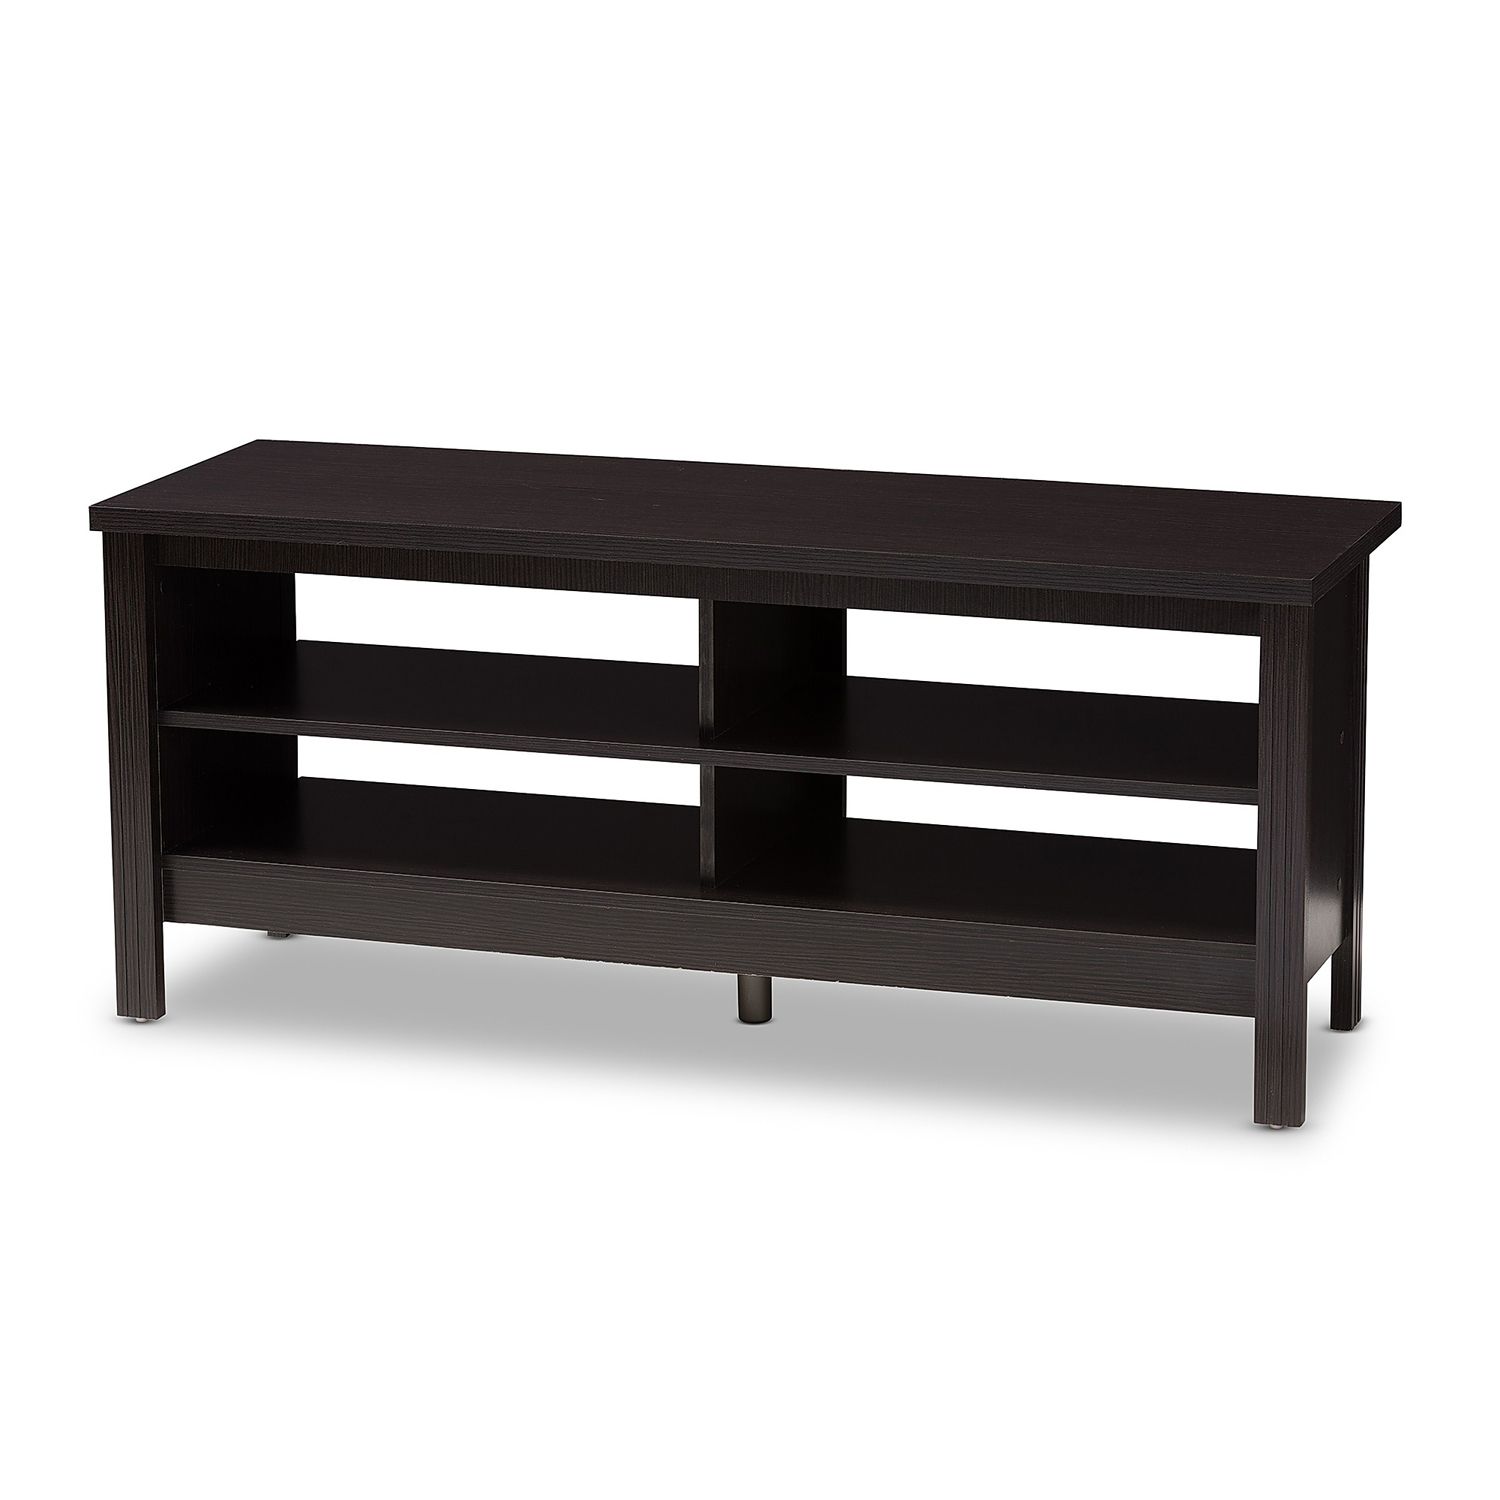 Quincy Wenge Brown Tv Stand – Pier1 For Wenge Tv Cabinets (View 14 of 15)